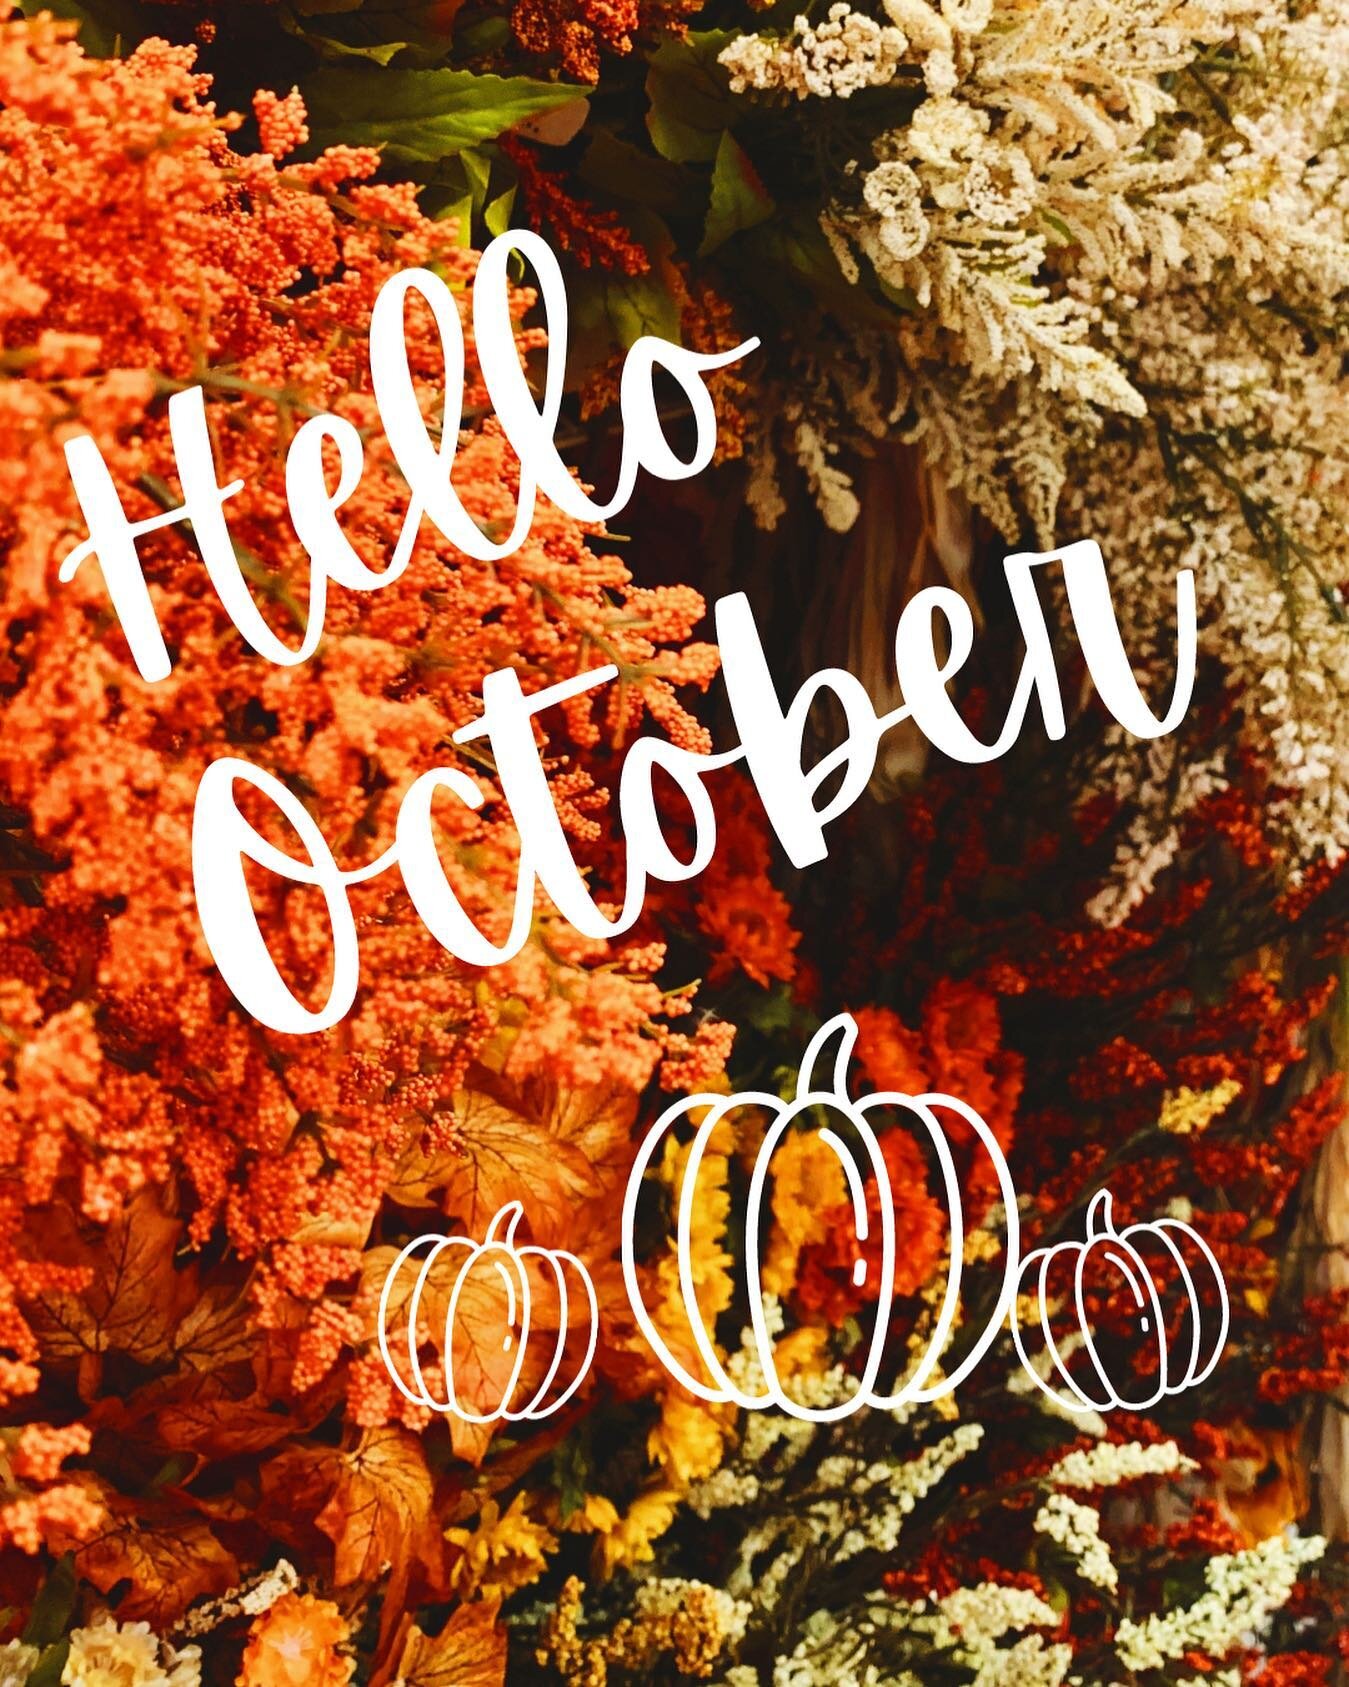 We all know what day it is! 🎃 it&rsquo;s the start of one of my favorite months! I enjoy everything this month brings..cold weather, hoodies,bonfires, pumpkin picking and my birthday! (I turn 30 at the end of the month 😱) but it&rsquo;s also my ult